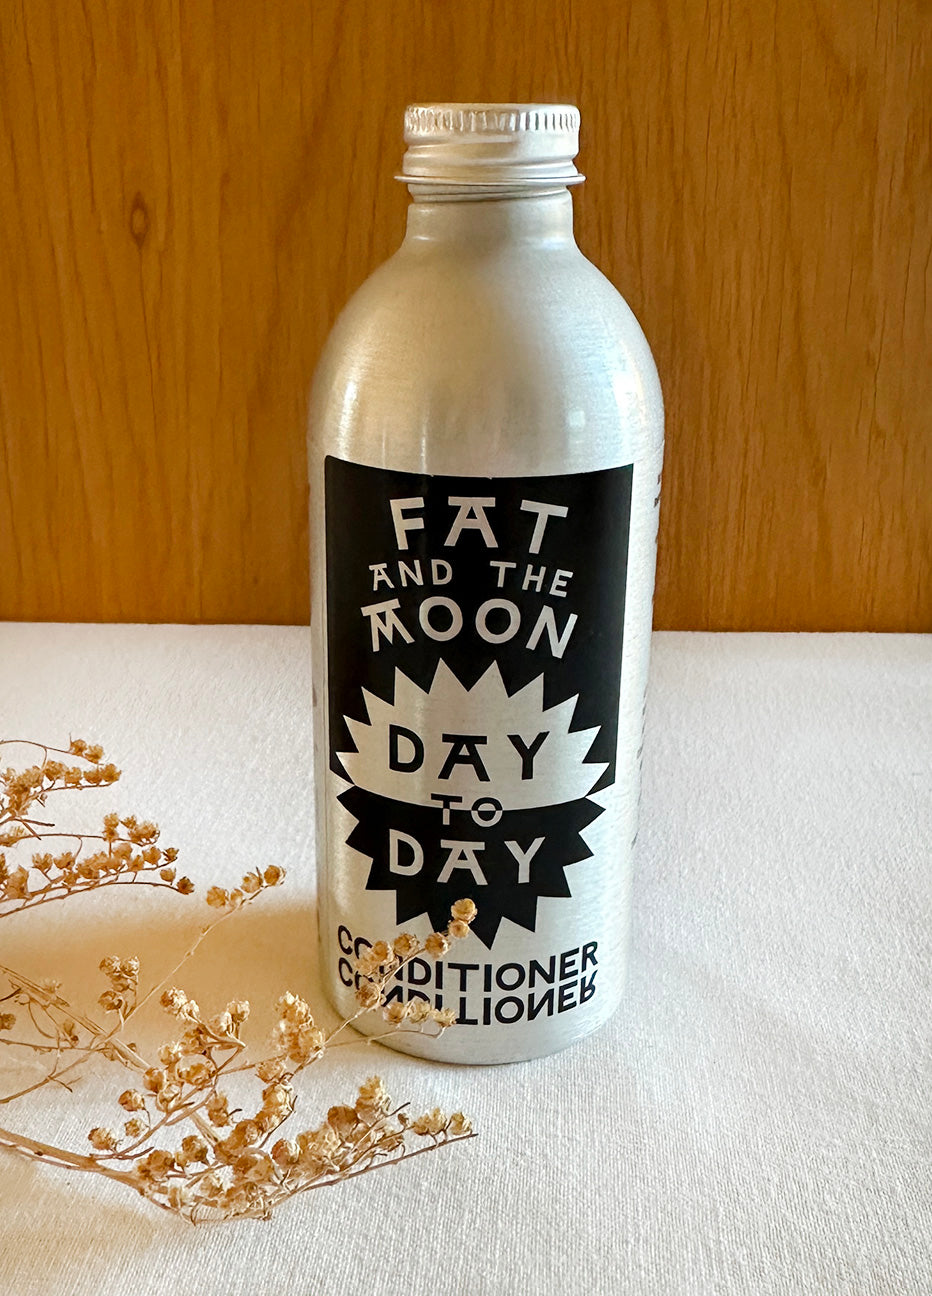 Fat and the Moon Day to Day Conditioner